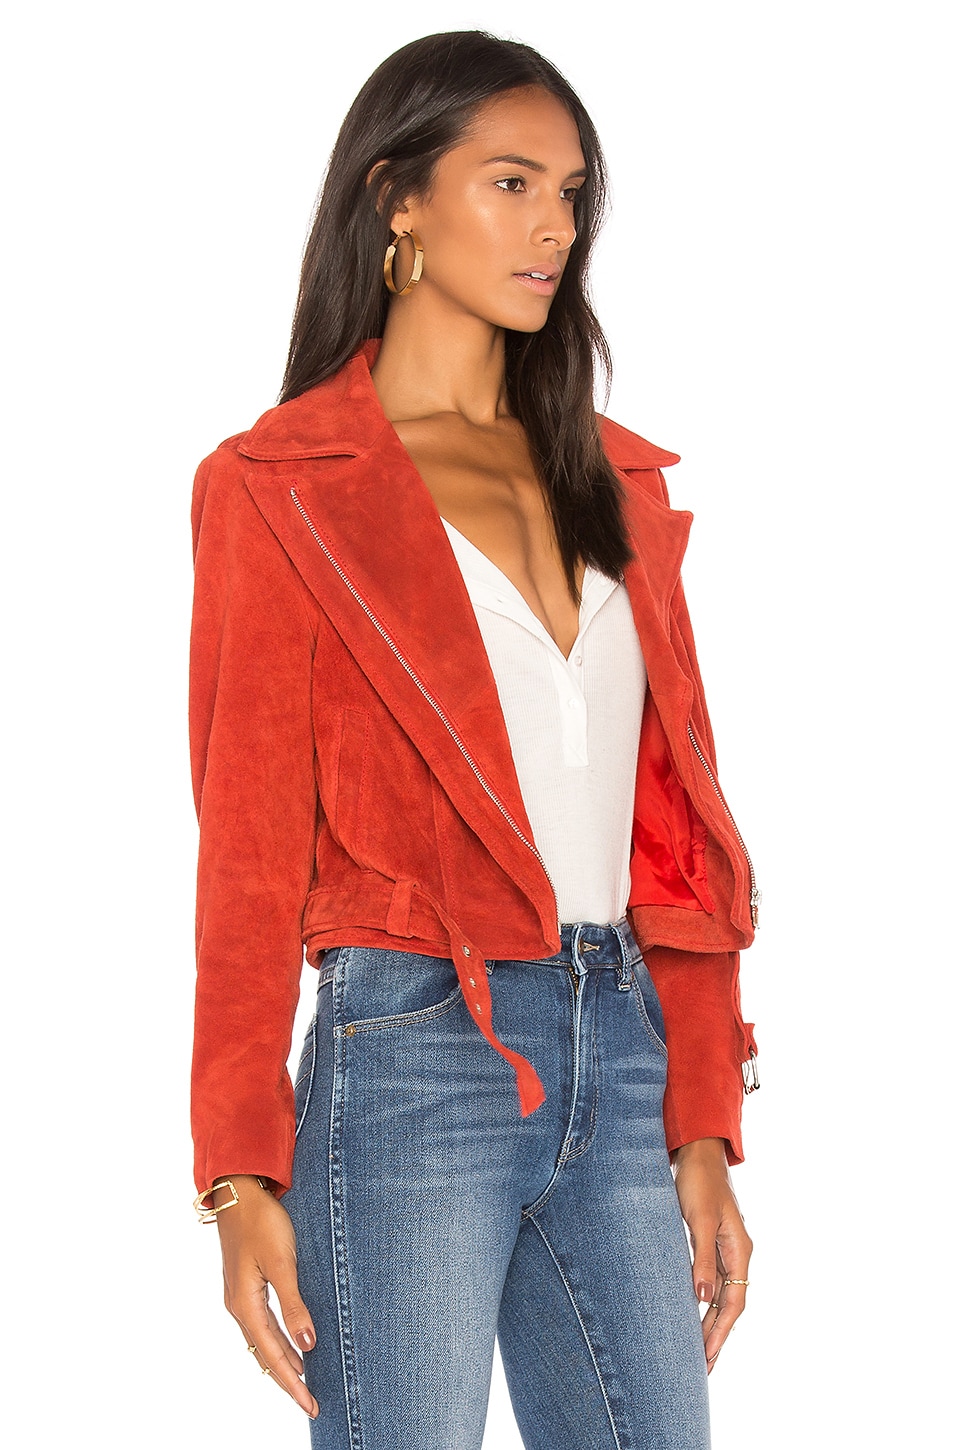 ROLLA'S Hutchence Suede Jacket in Flame | REVOLVE